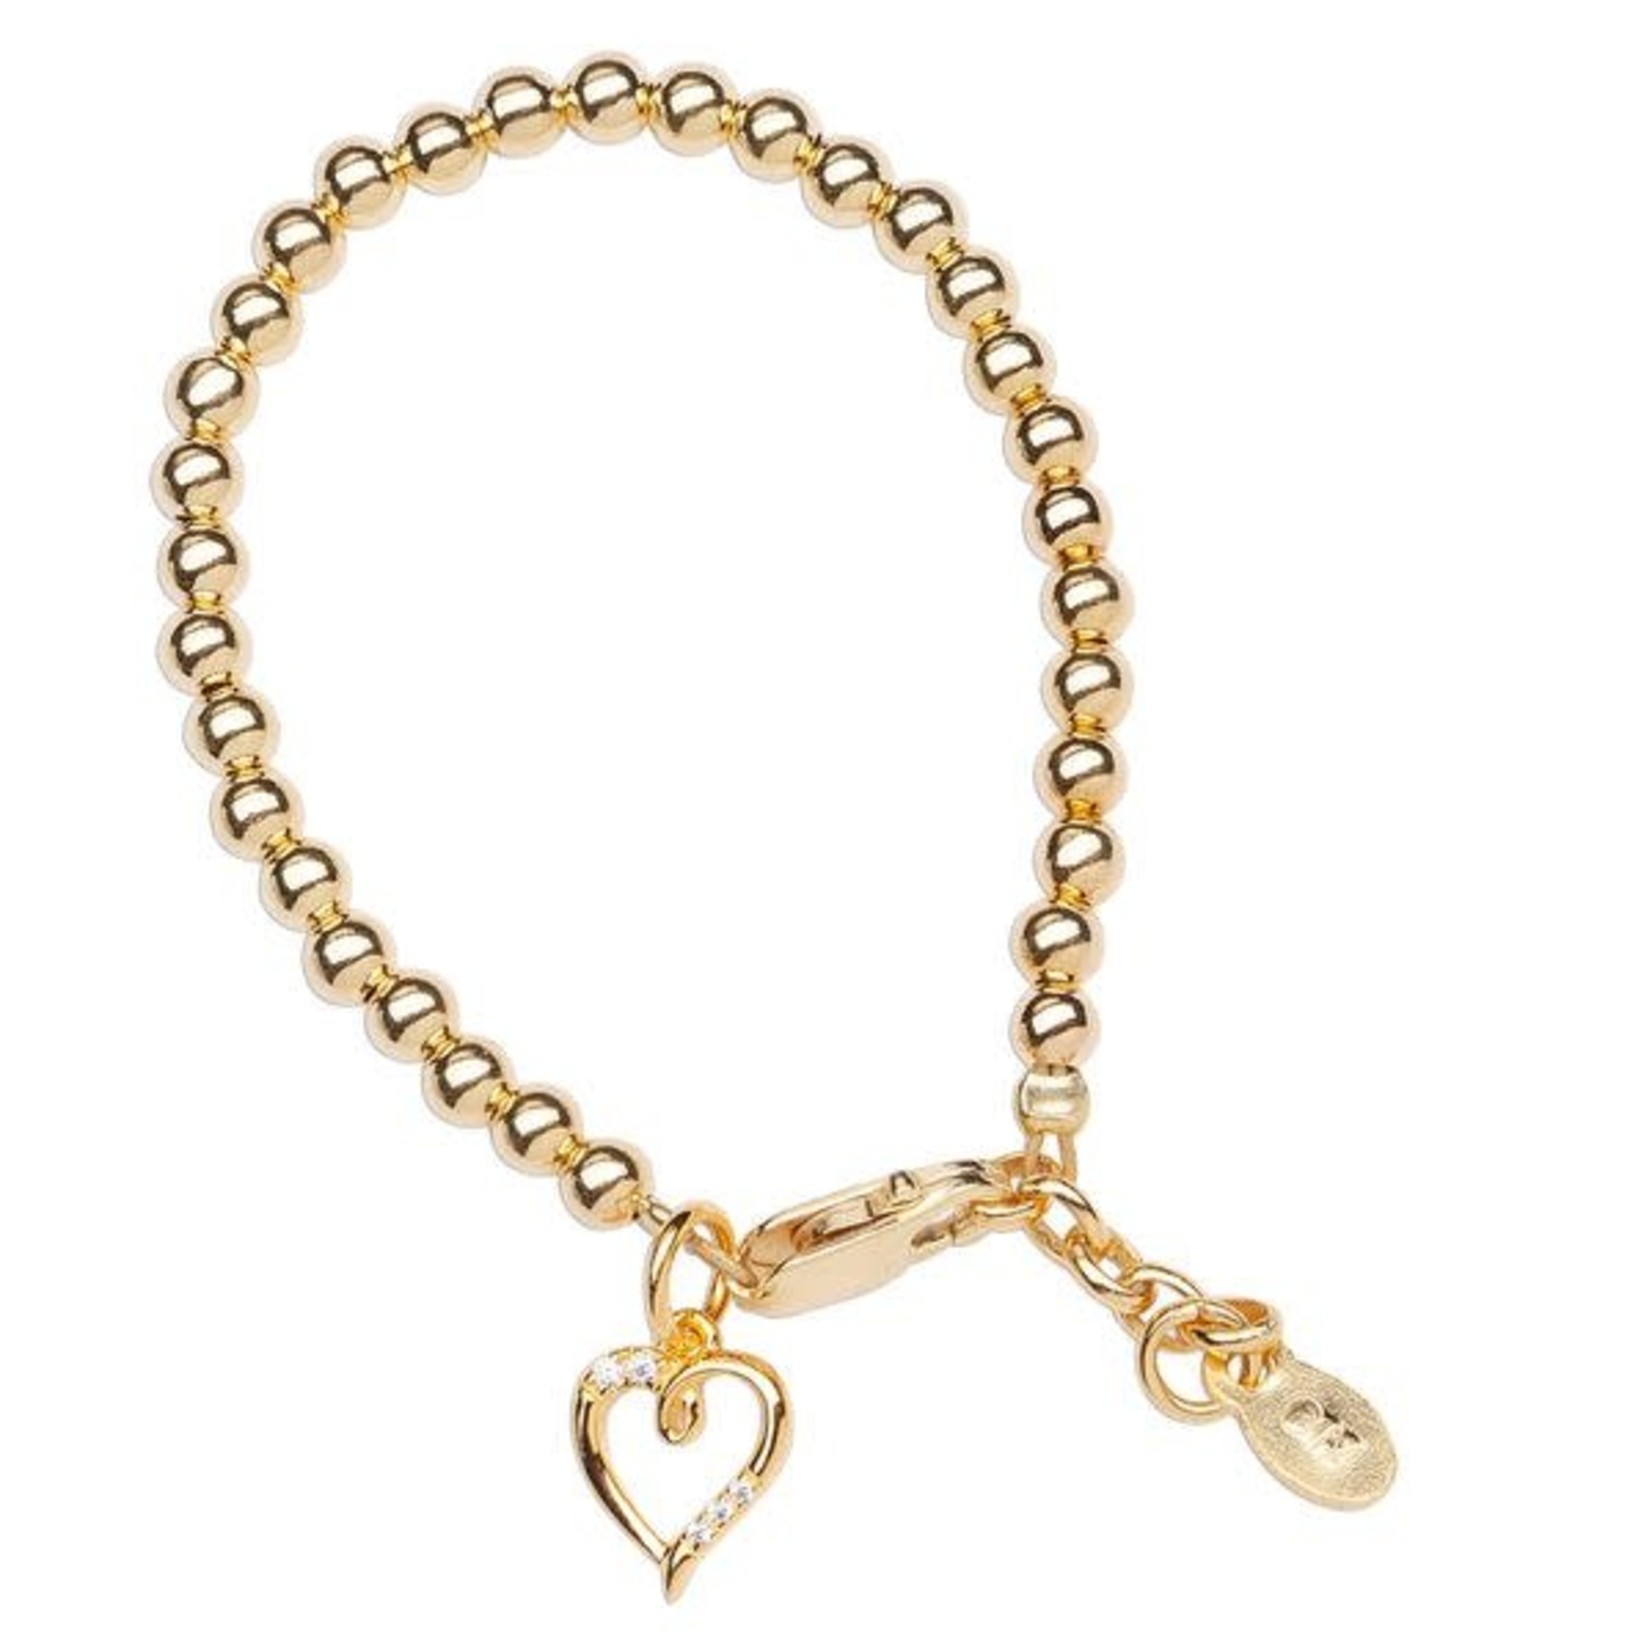 Cherished Moments Aria - M (1-5y) Bracelet 14K Gold Plated with Heart